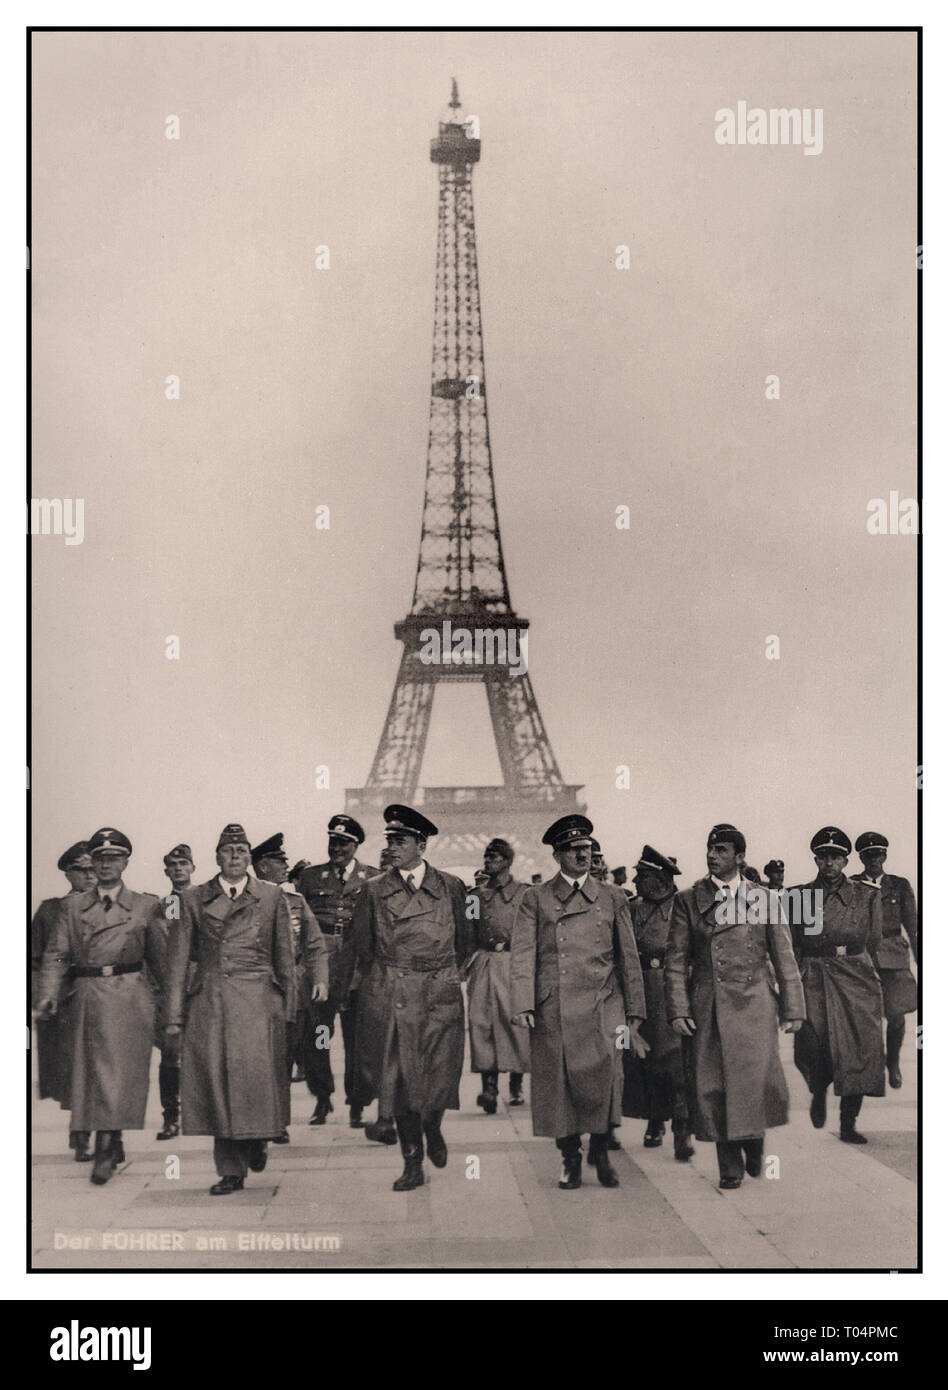 HITLER Eiffel Tower PARIS Adolf Hitler with his group of high ranking Nazi Germany Military Officers including industrial strategist Albert Speer at his right side, in occupied Paris with the Eiffel Tower in background. An iconic carefully arranged Nazi propaganda image with German caption added, of Nazi Germany occupation in France World War II July 1940 WW2 Stock Photo